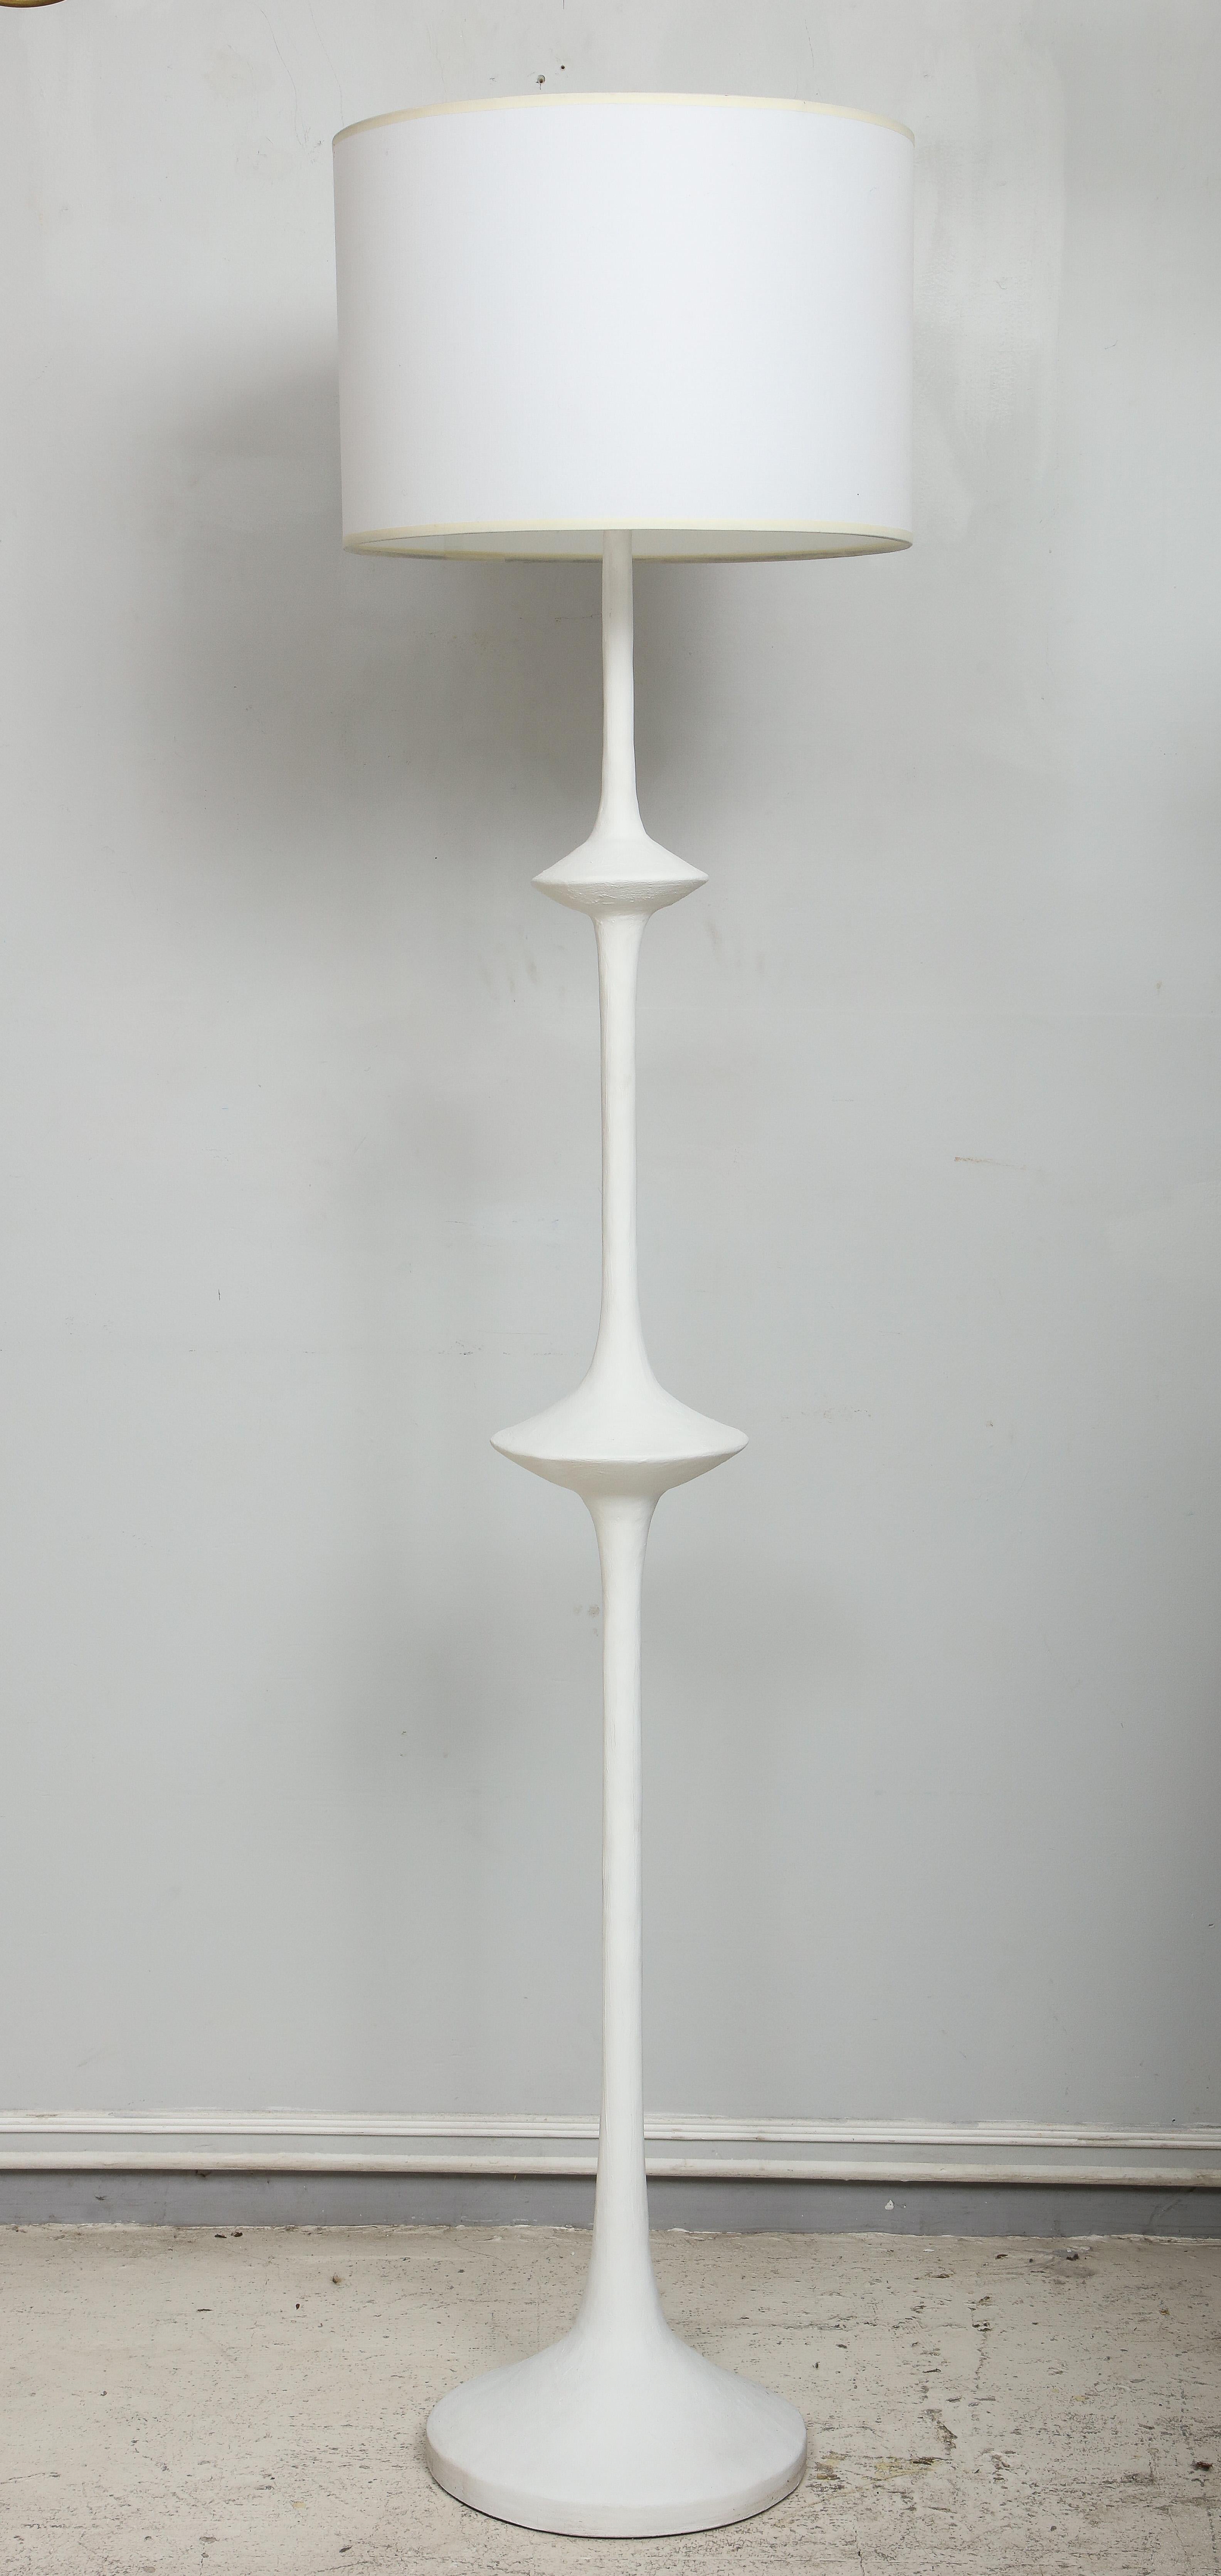 Custom plaster fixture / floor lamp in the Giacometti Manner.
The lamp shade is not included.
Please note that this fixture is customizable.
Lead Time for custom made is 8-10 weeks.